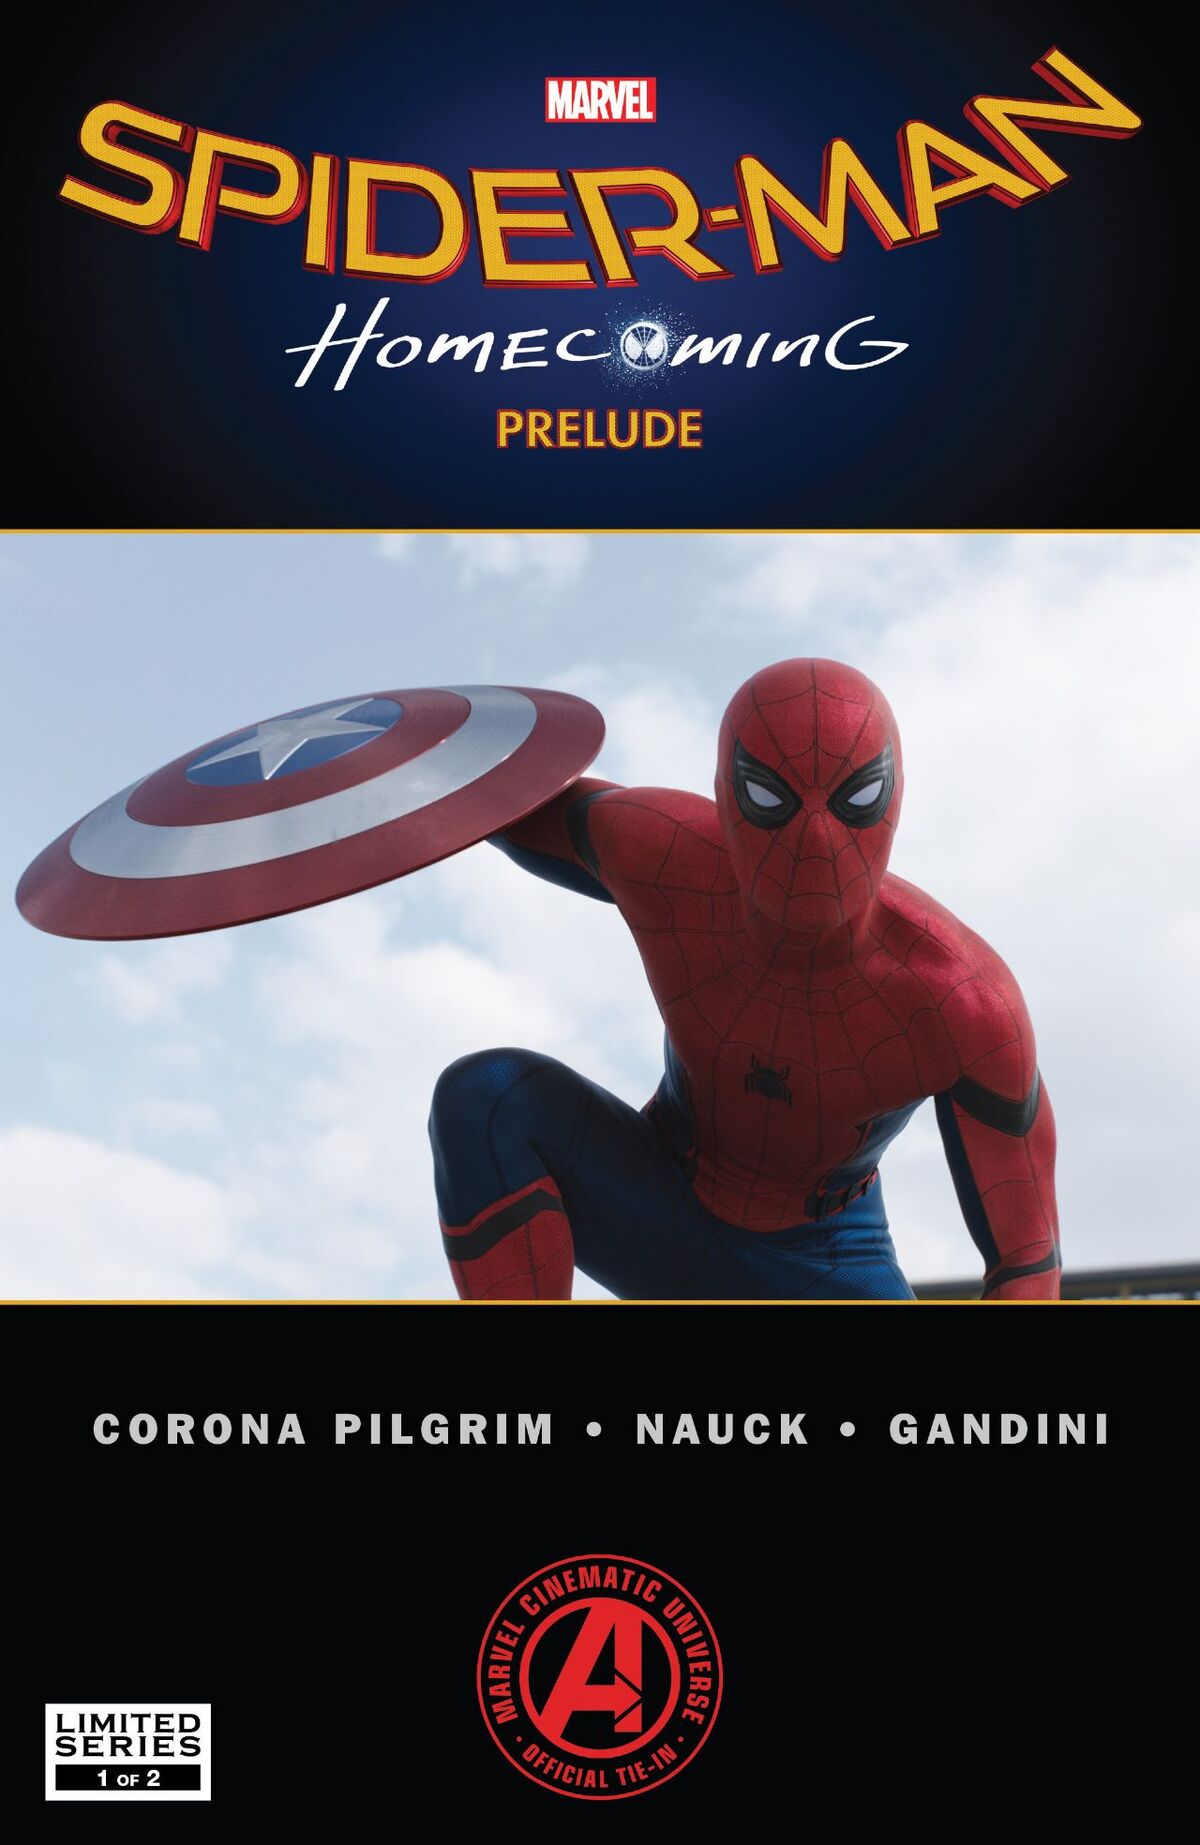 Spider-man: homecoming prelude comic